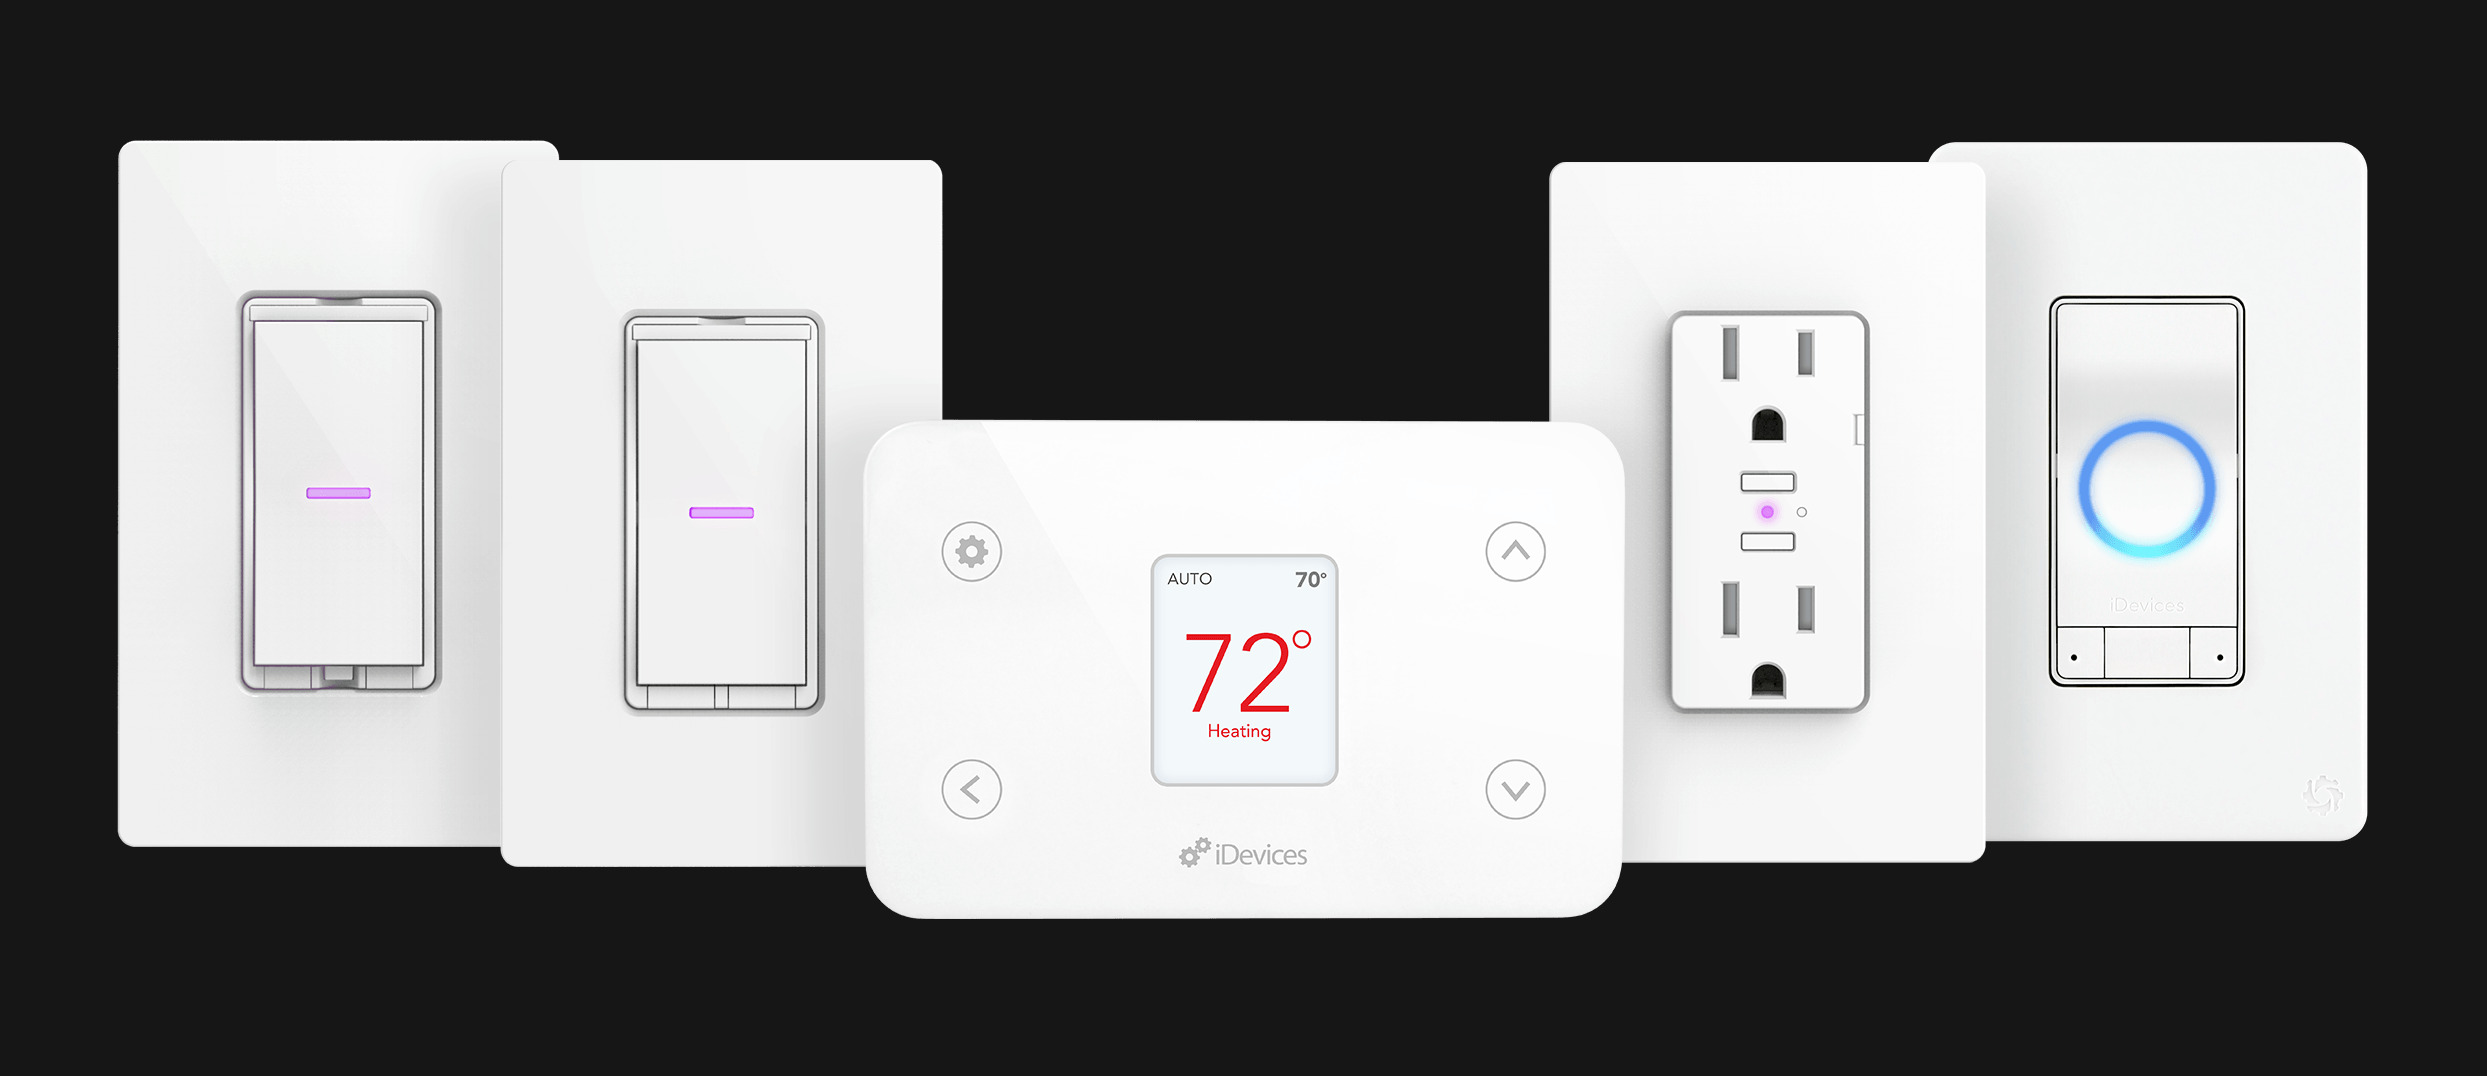 iDevices, Thermostat, Socket, Outdoor Switch, Switch, Wall Outlet, Wall Switch, Dimmer Switch, iShower, Connected, Voice Control, Wi-Fi, Smart Home, Amazon Alexa, Google Assistant, Apple HomeKit, iOS, Samsung, Siri